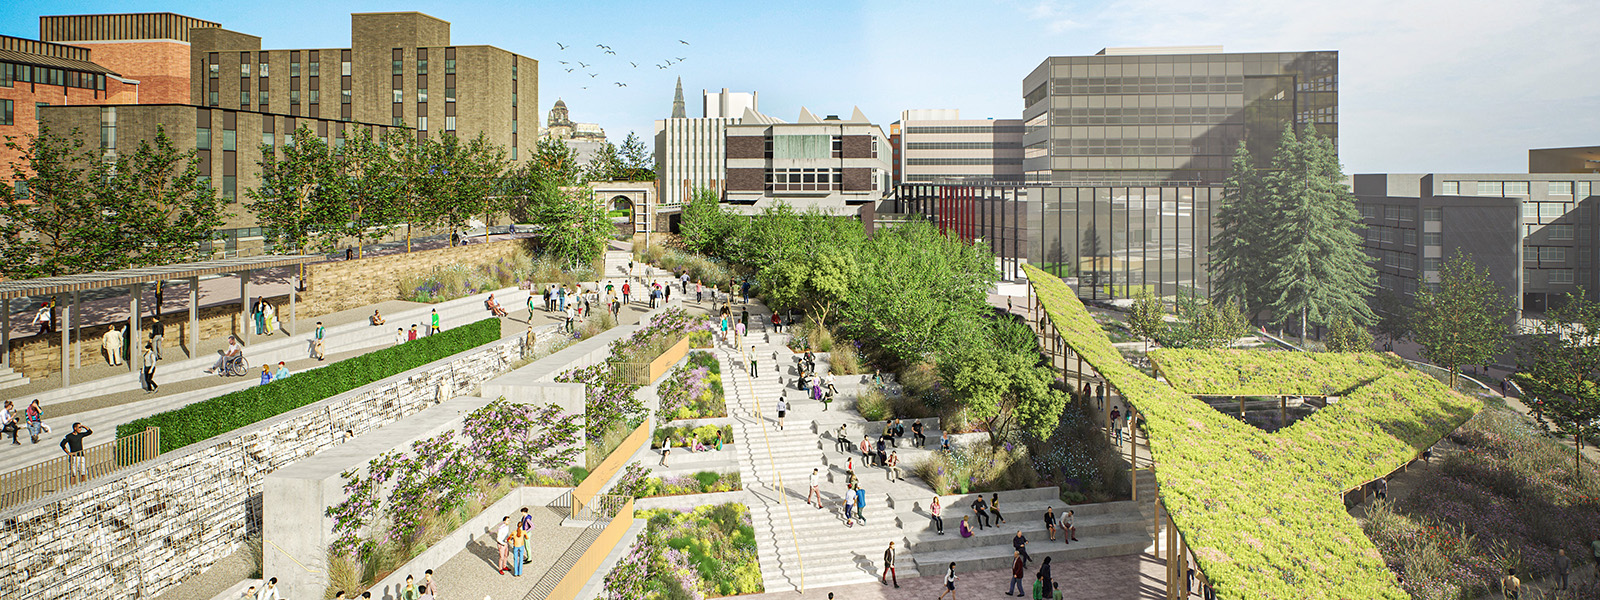 Artist impression of Heart of the Campus project